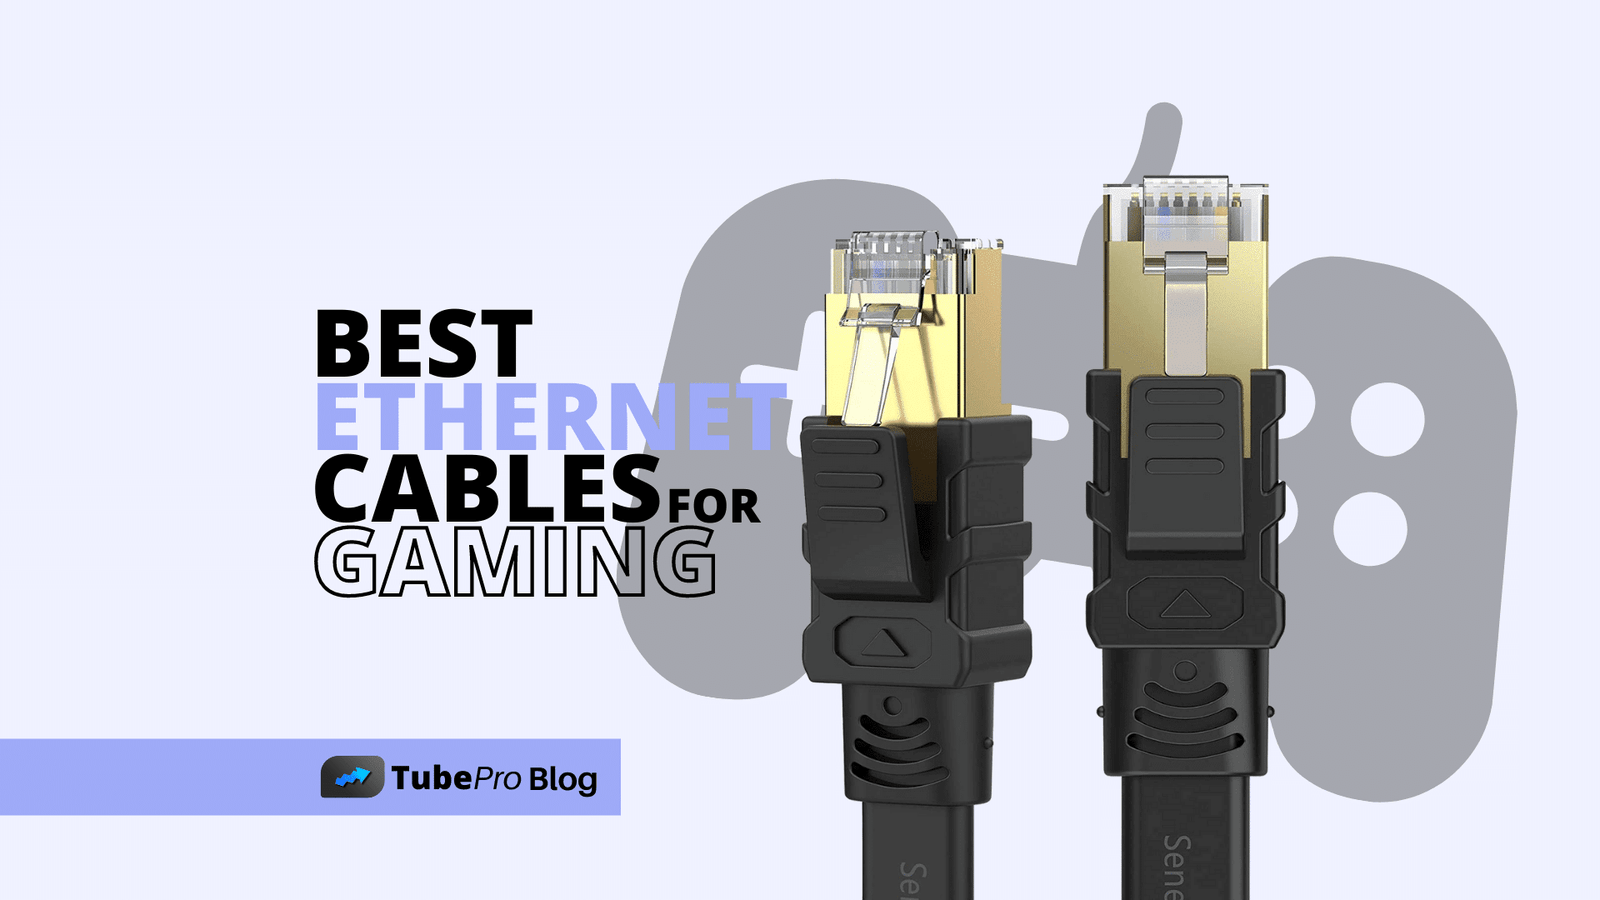 5 Best Ethernet Cables For Gaming in 2021